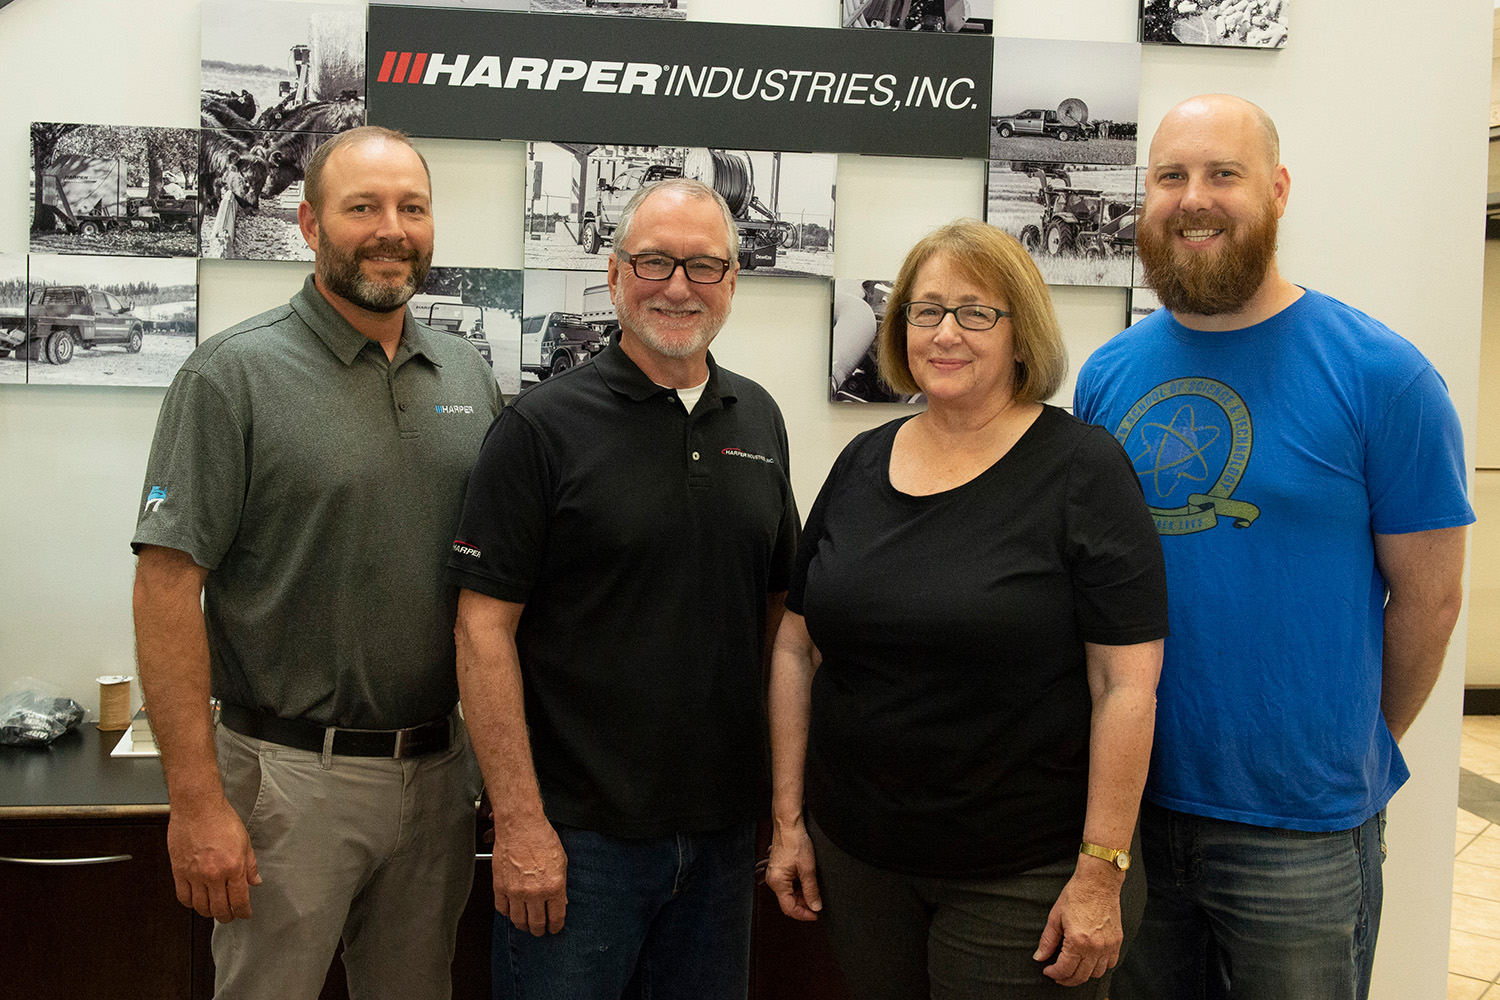 Hesston alumni continue to make history at Harper Industries (L-R) Drew Gerber ’04, Mike Reber ’76, Faith (Hershberger) ’74 Penner and Zach Bauer ’04 